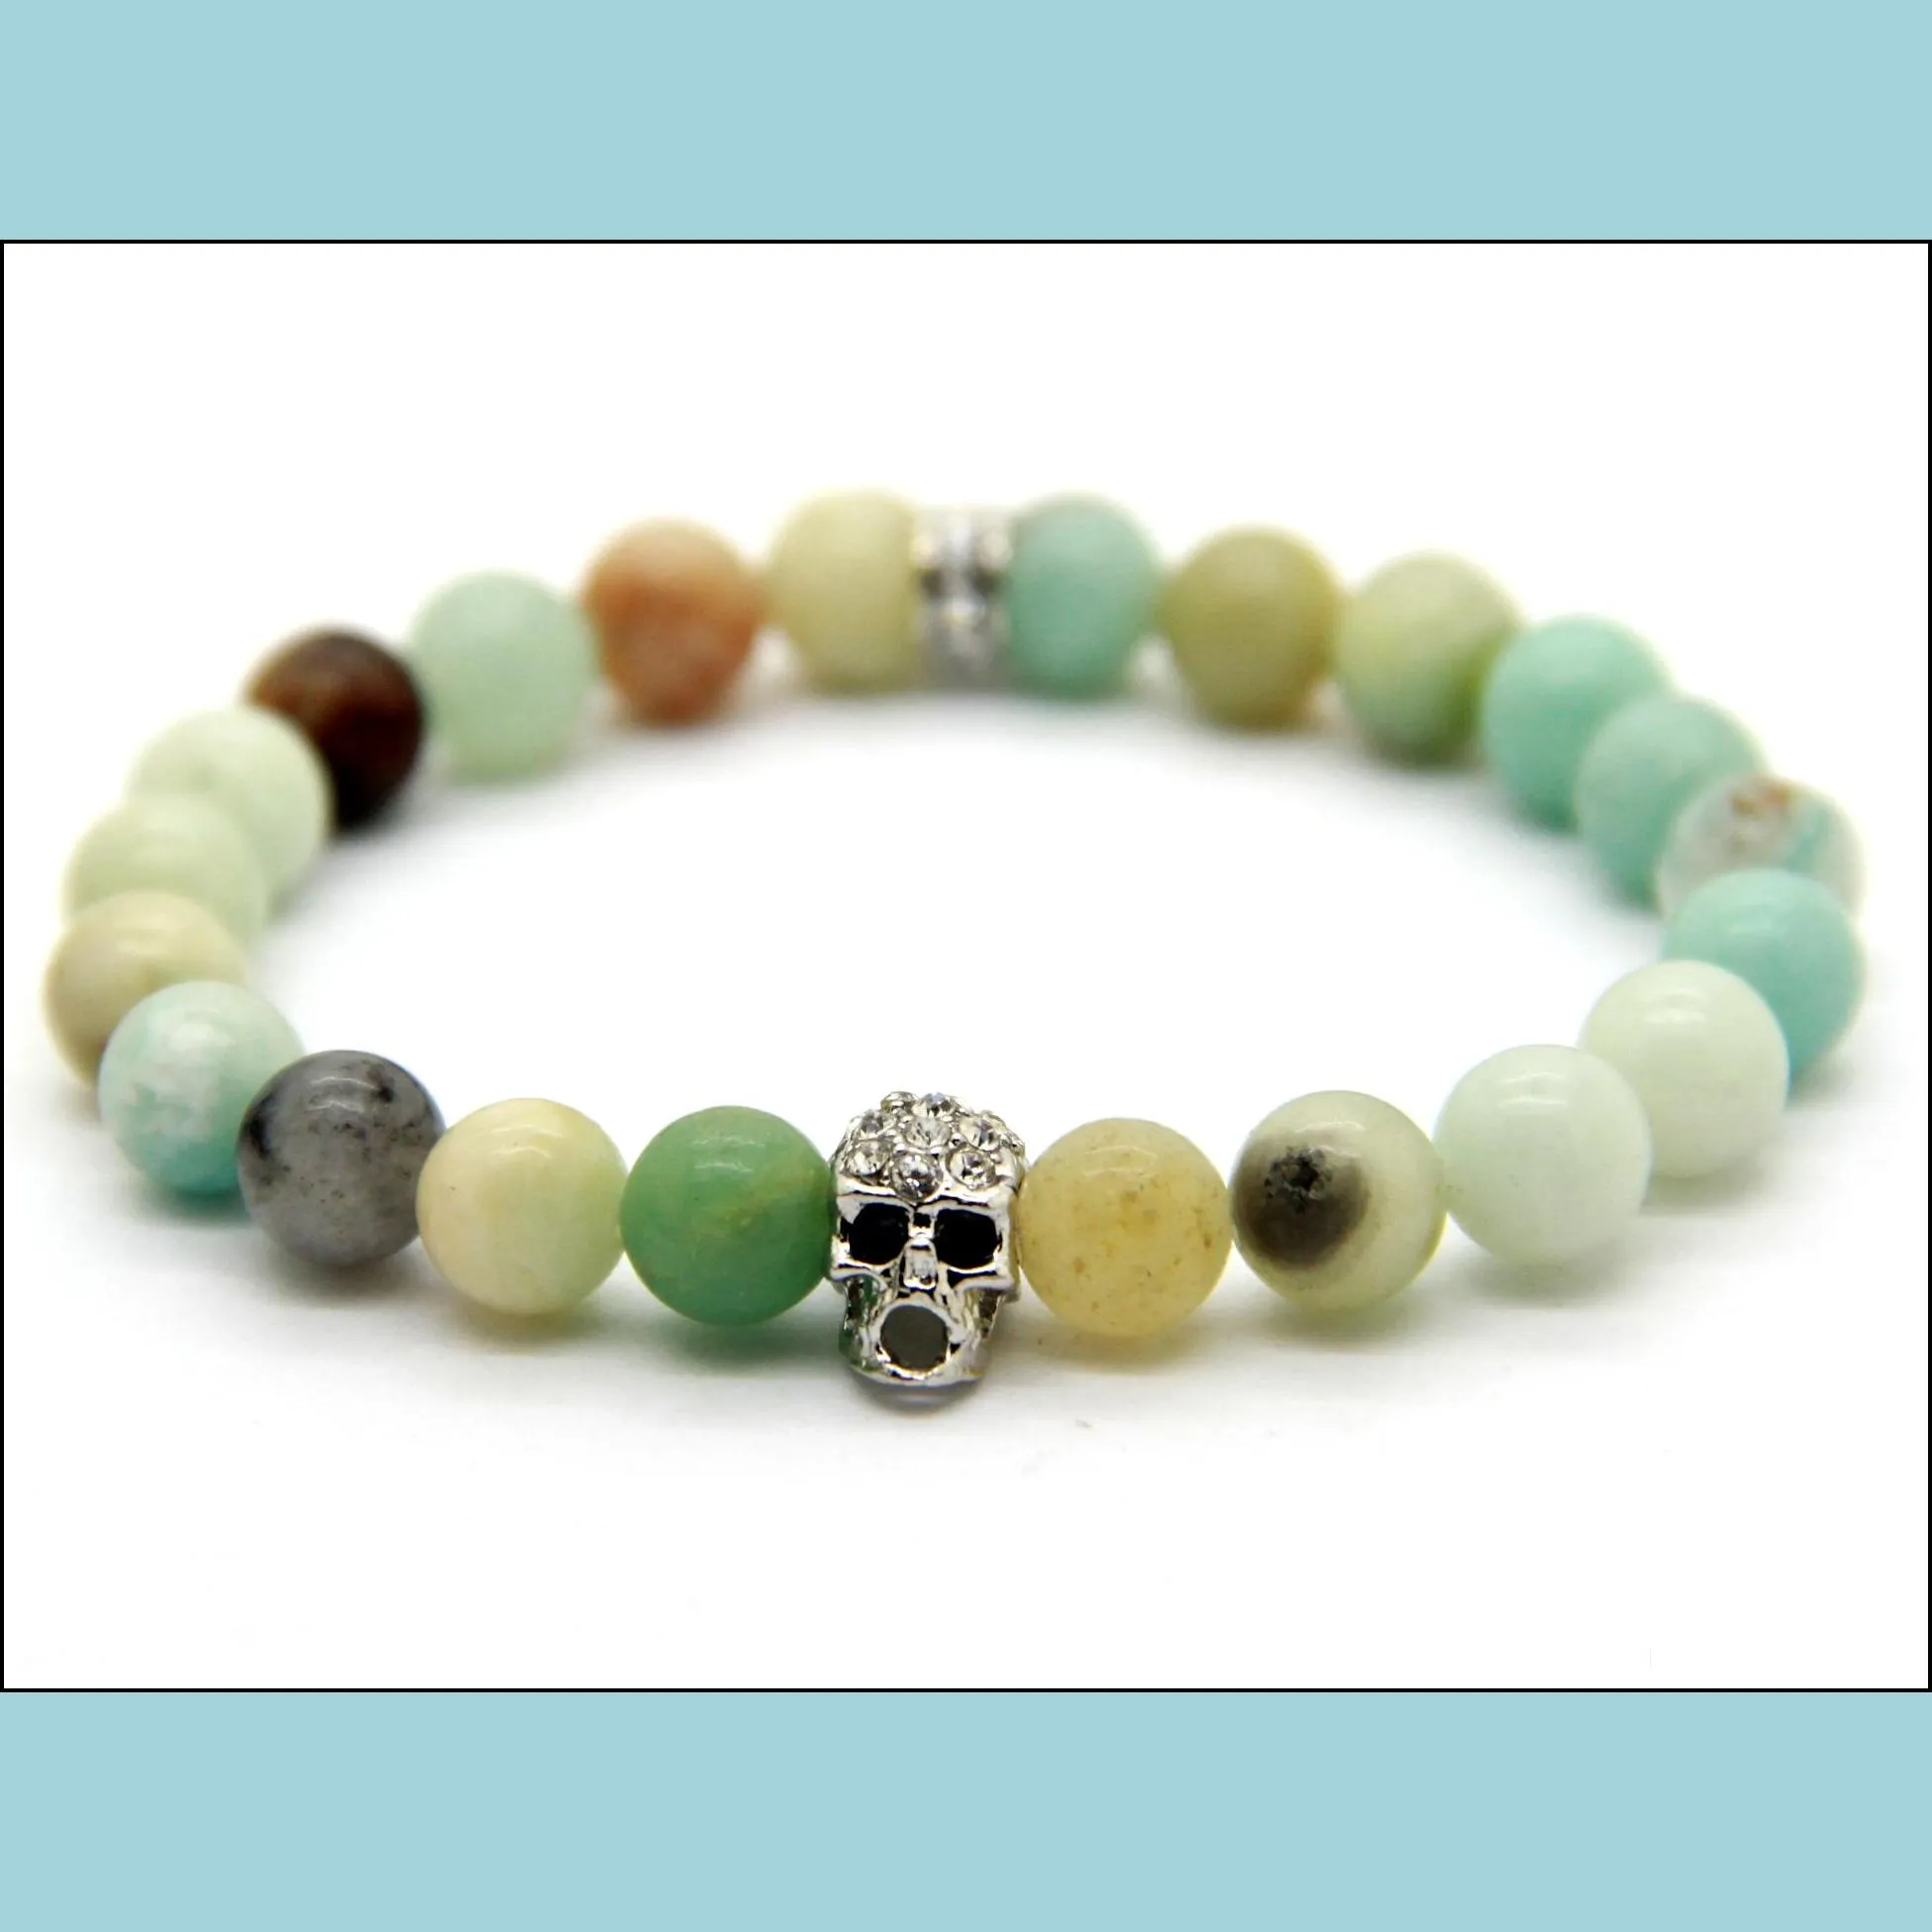 2015 new design jewelry wholesale 8mm natural amazonite stone beads silver skull bracelets, summer bracleets party gift